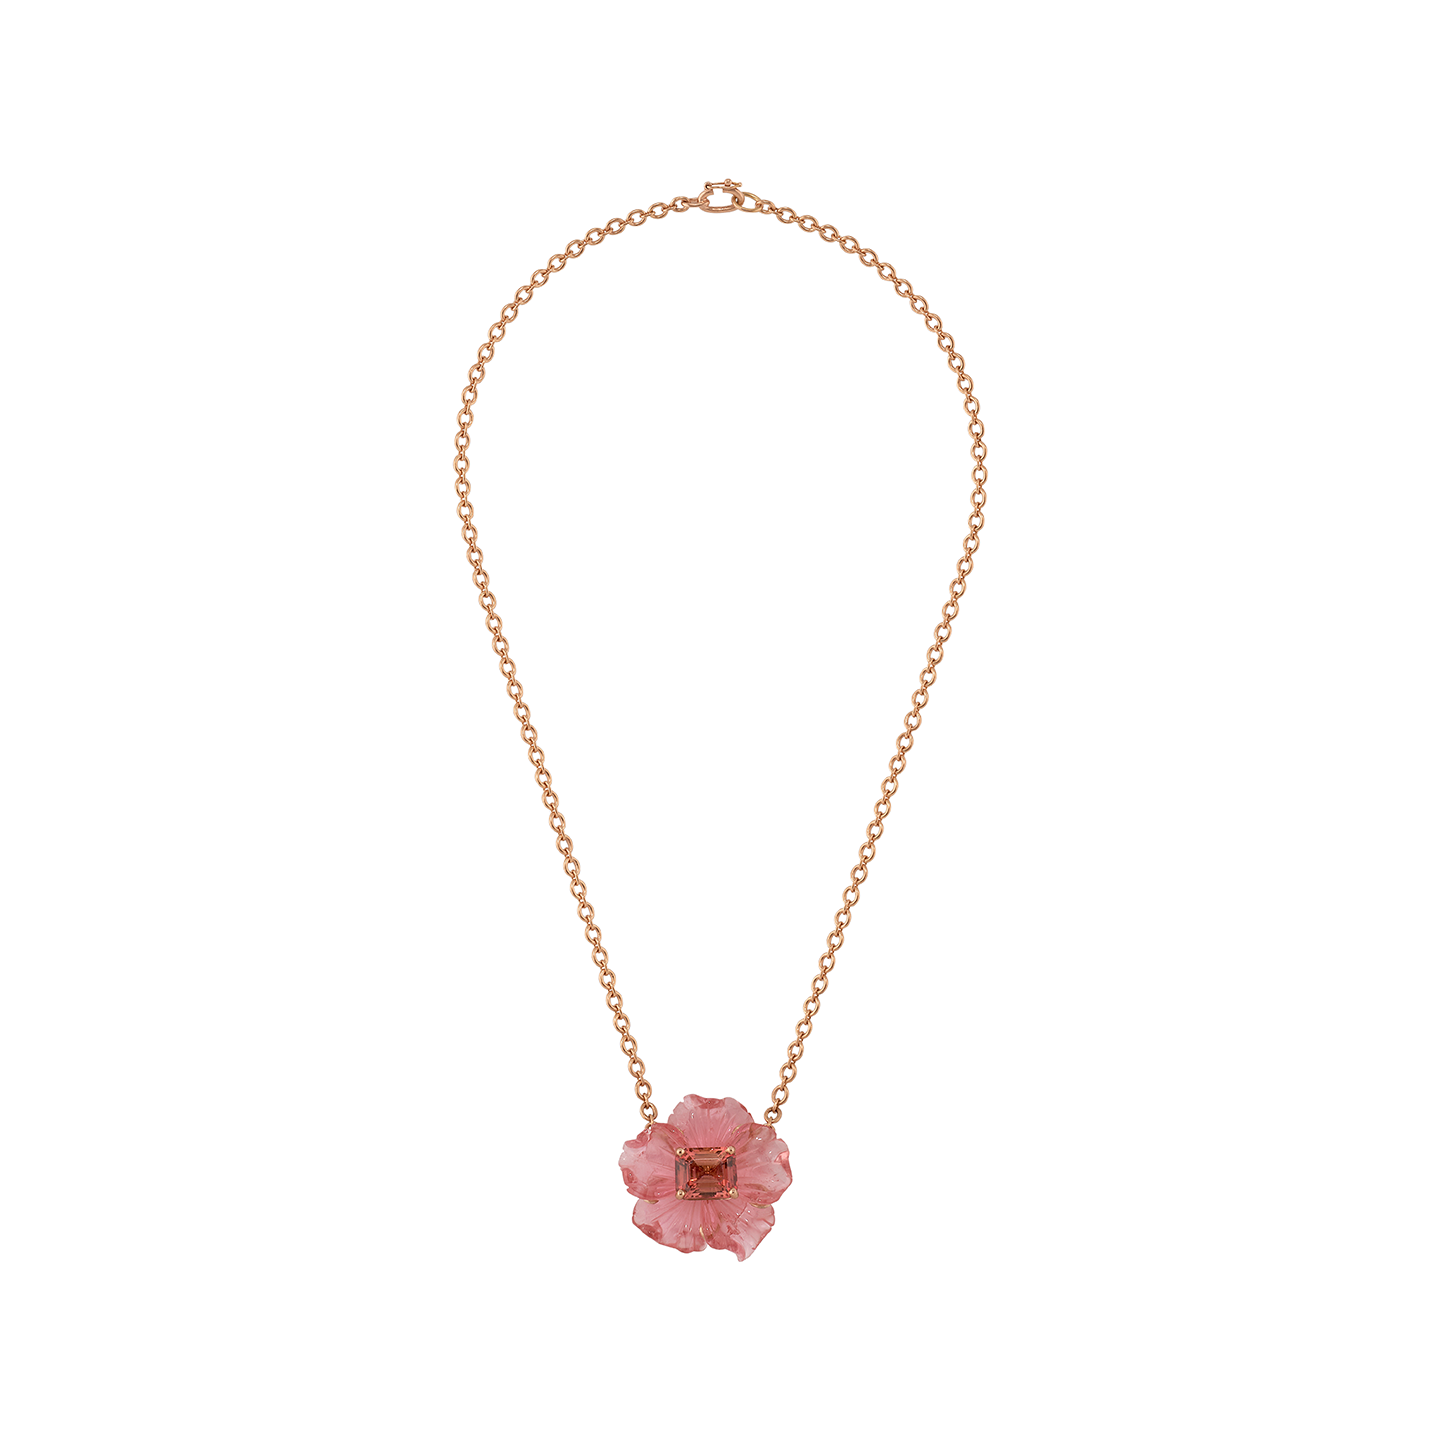 Irene Neuwirth 'Tropical Flower' One-of-a-Kind Carved Pink Tourmaline Necklace